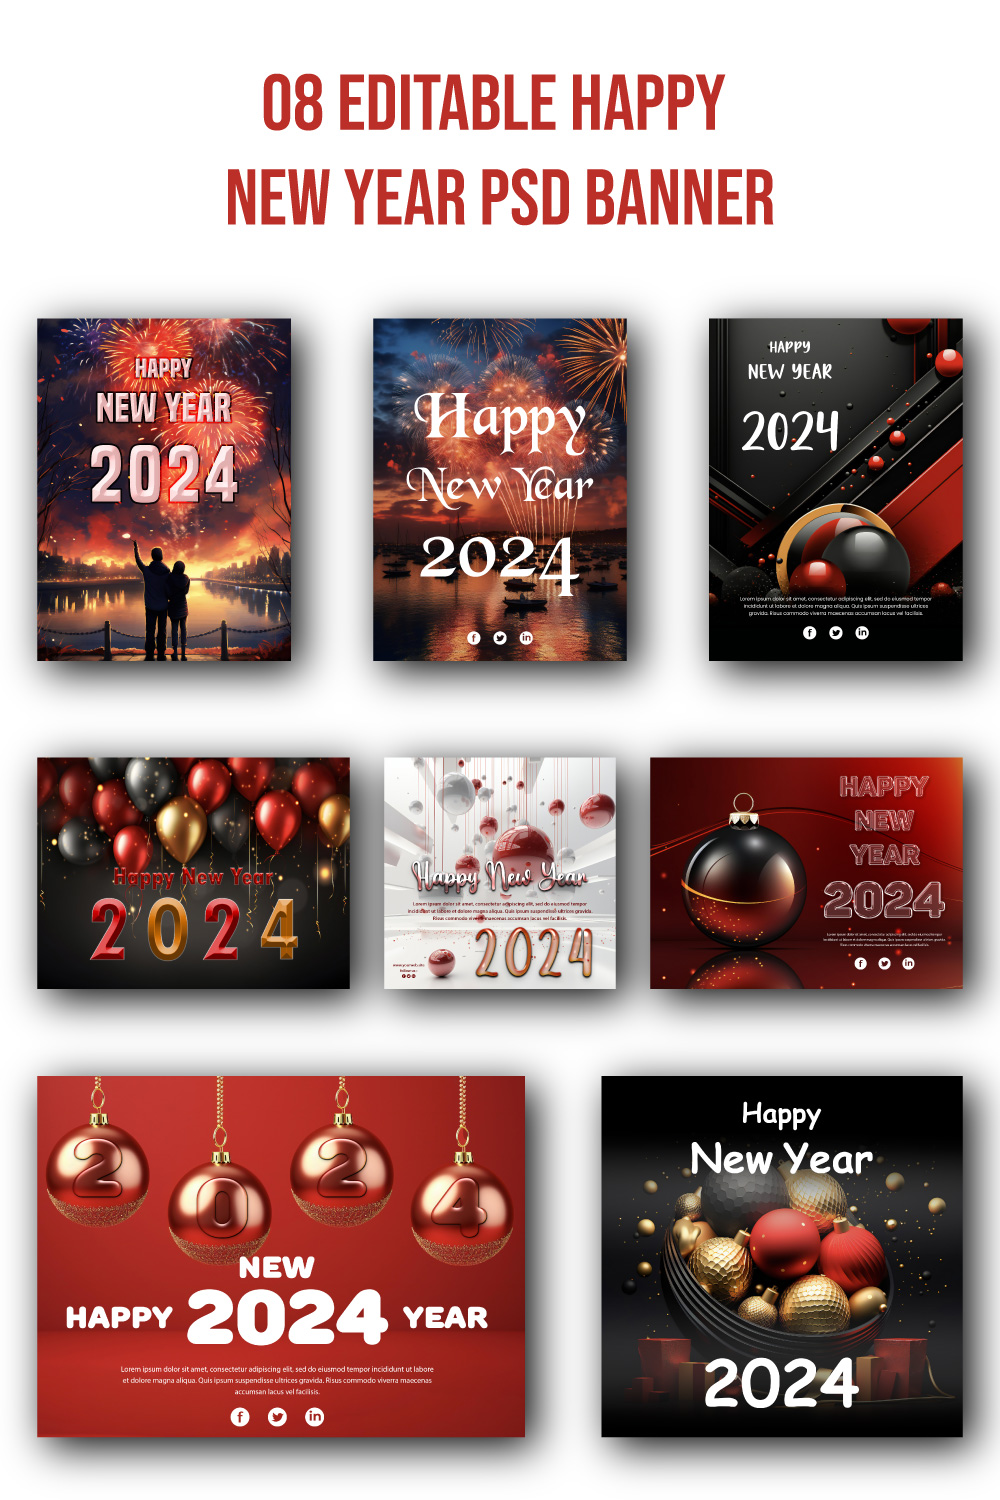 08 Happy new year social media editable psd template pinterest preview image.